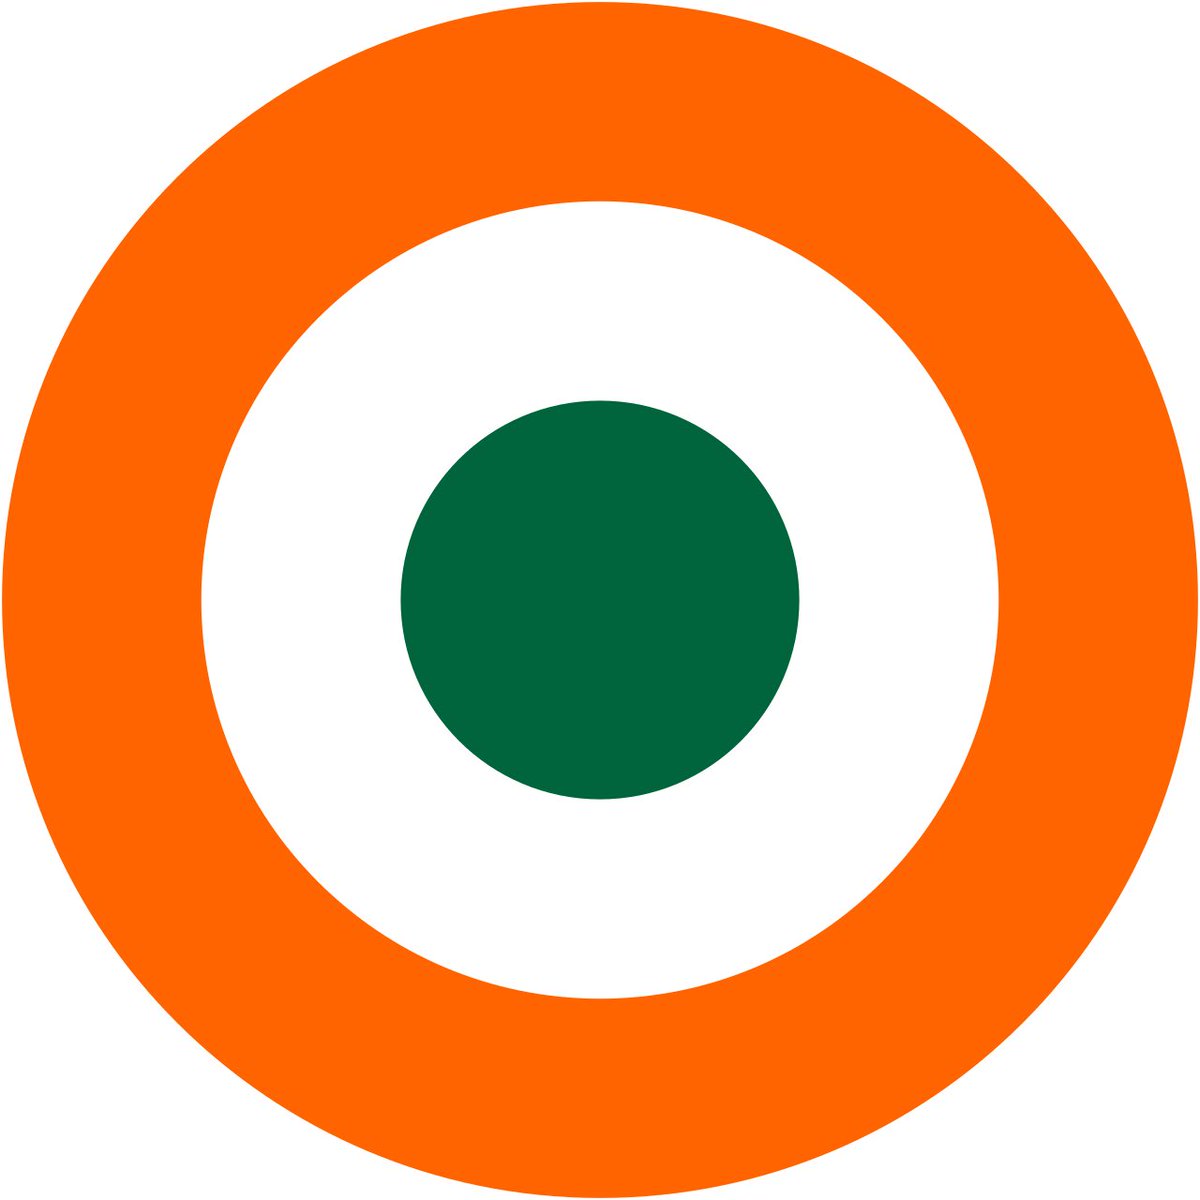 India: YOU HAVE A CULTURALLY AND VISUALLY DISTINCT CIRCLE ON YOUR FLAG ALREADY YOU DICKHEADS